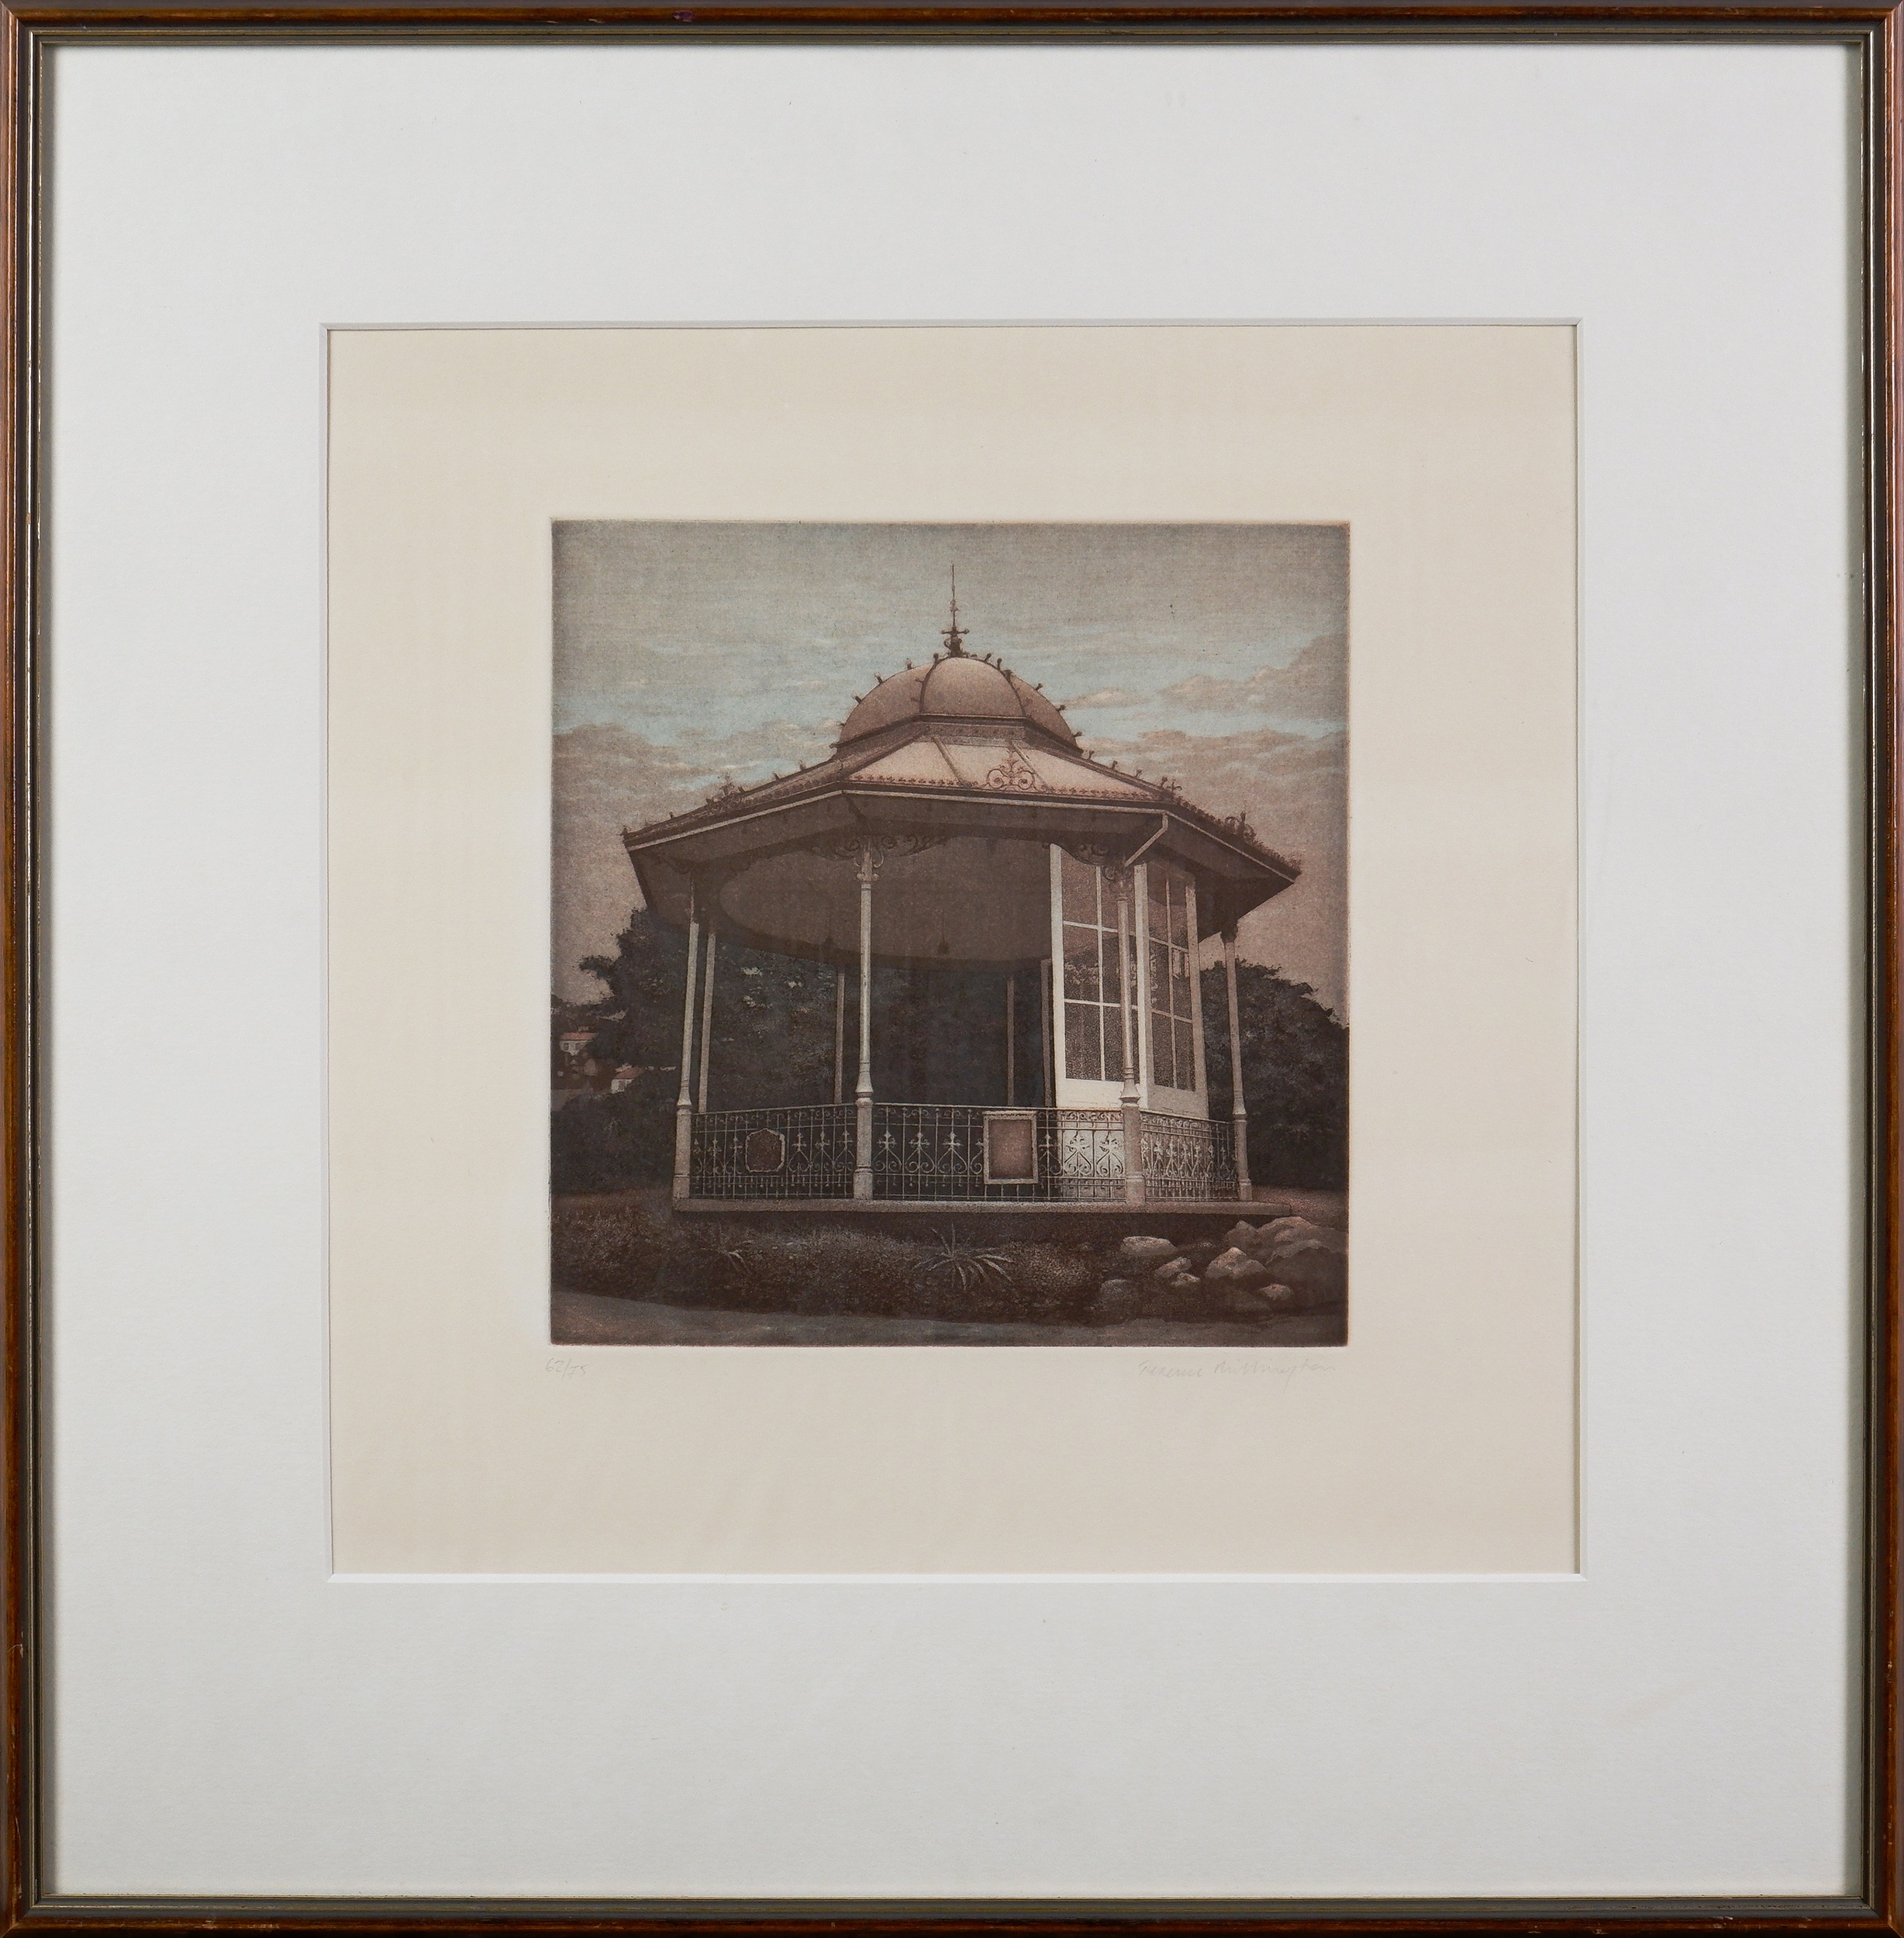 'Terence Millington (born 1943, British), Bandstand 11, Etching Edition 62/75, 20.5 x 19.5 cm (image size)'